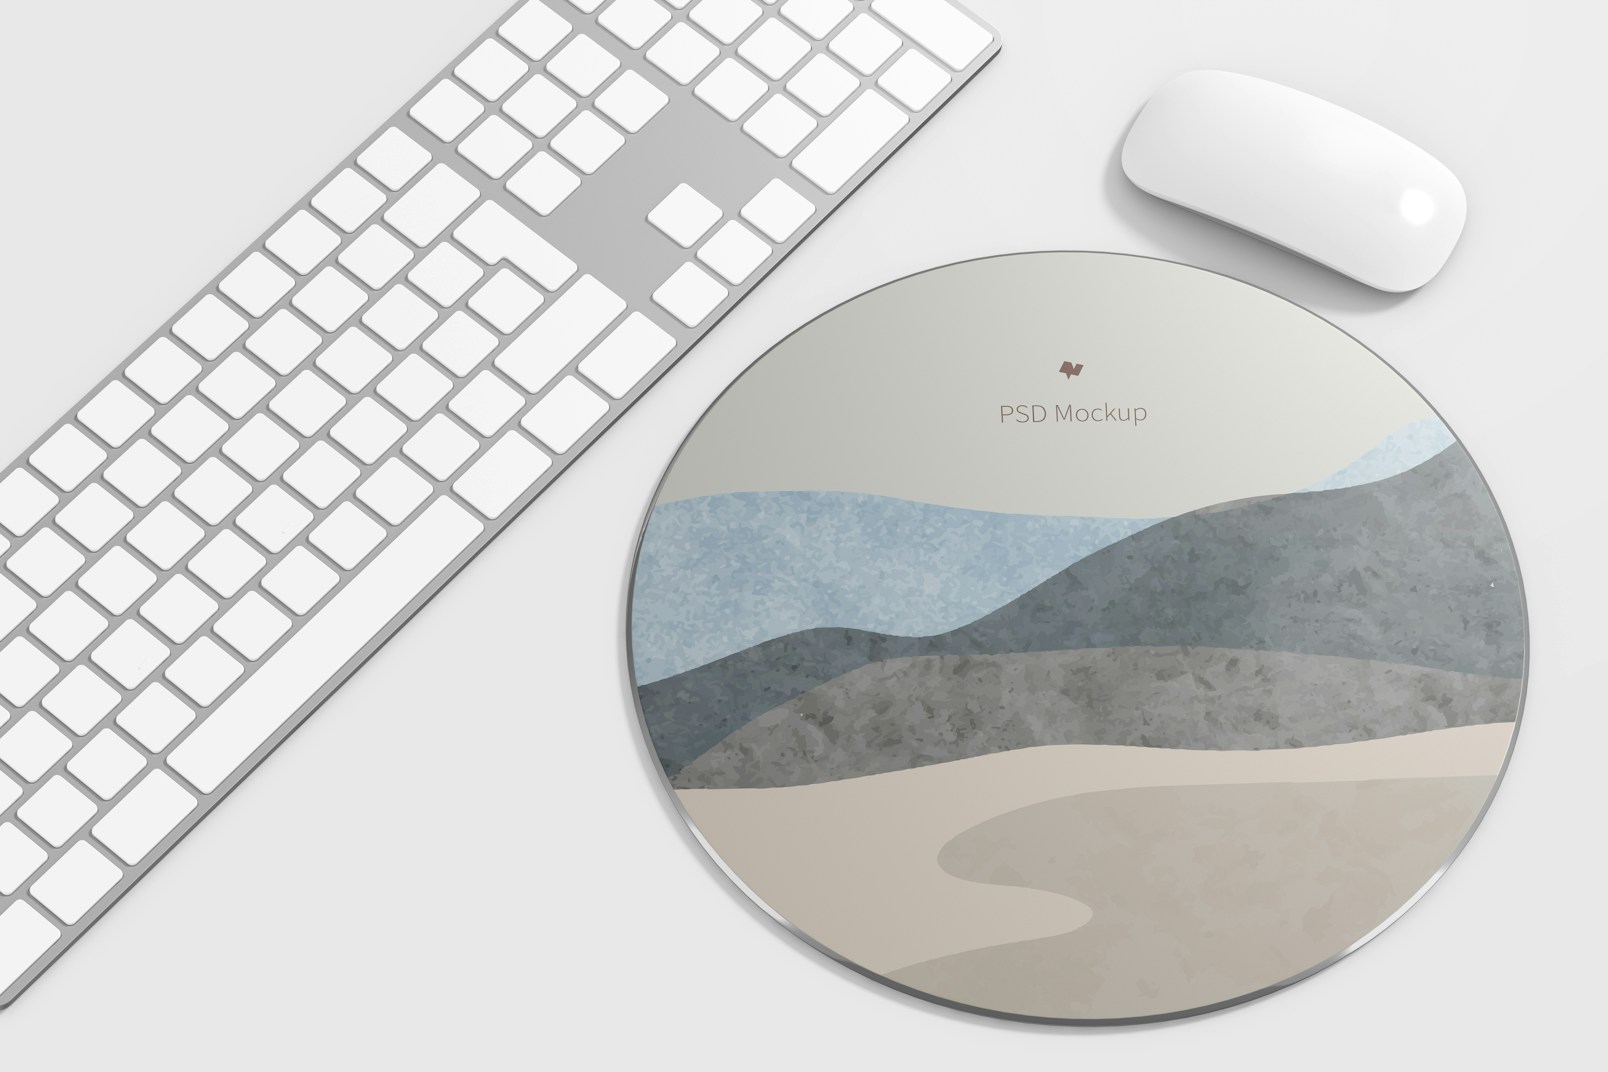 Round Aluminum Mouse Pad with Keyboard Mockup